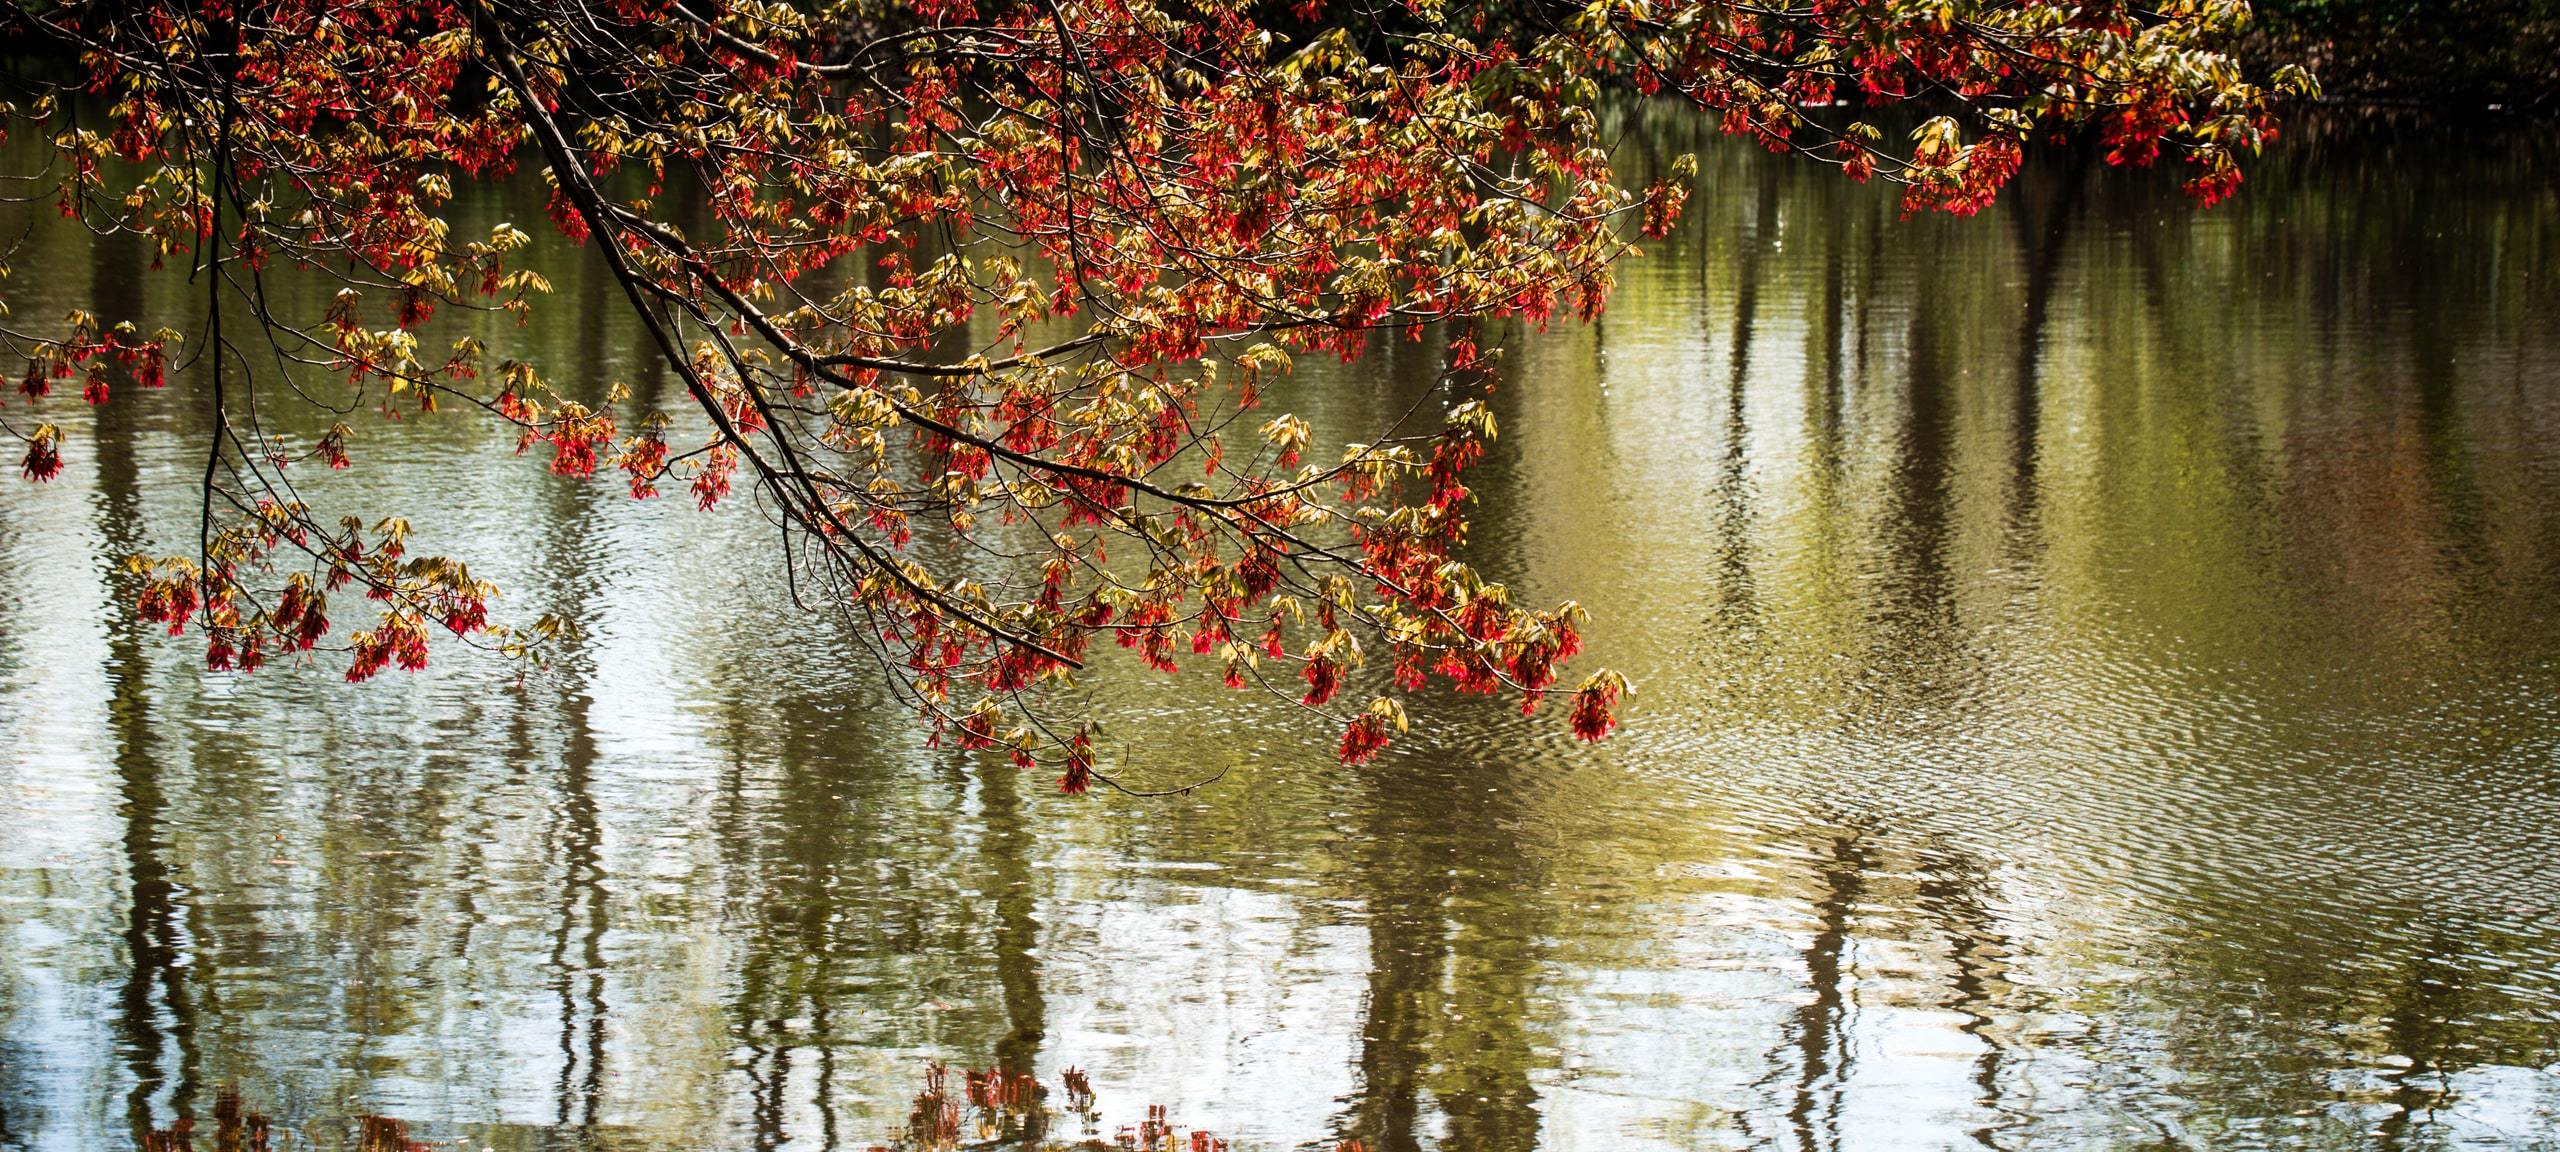 Blooming red tree touching water with reflection